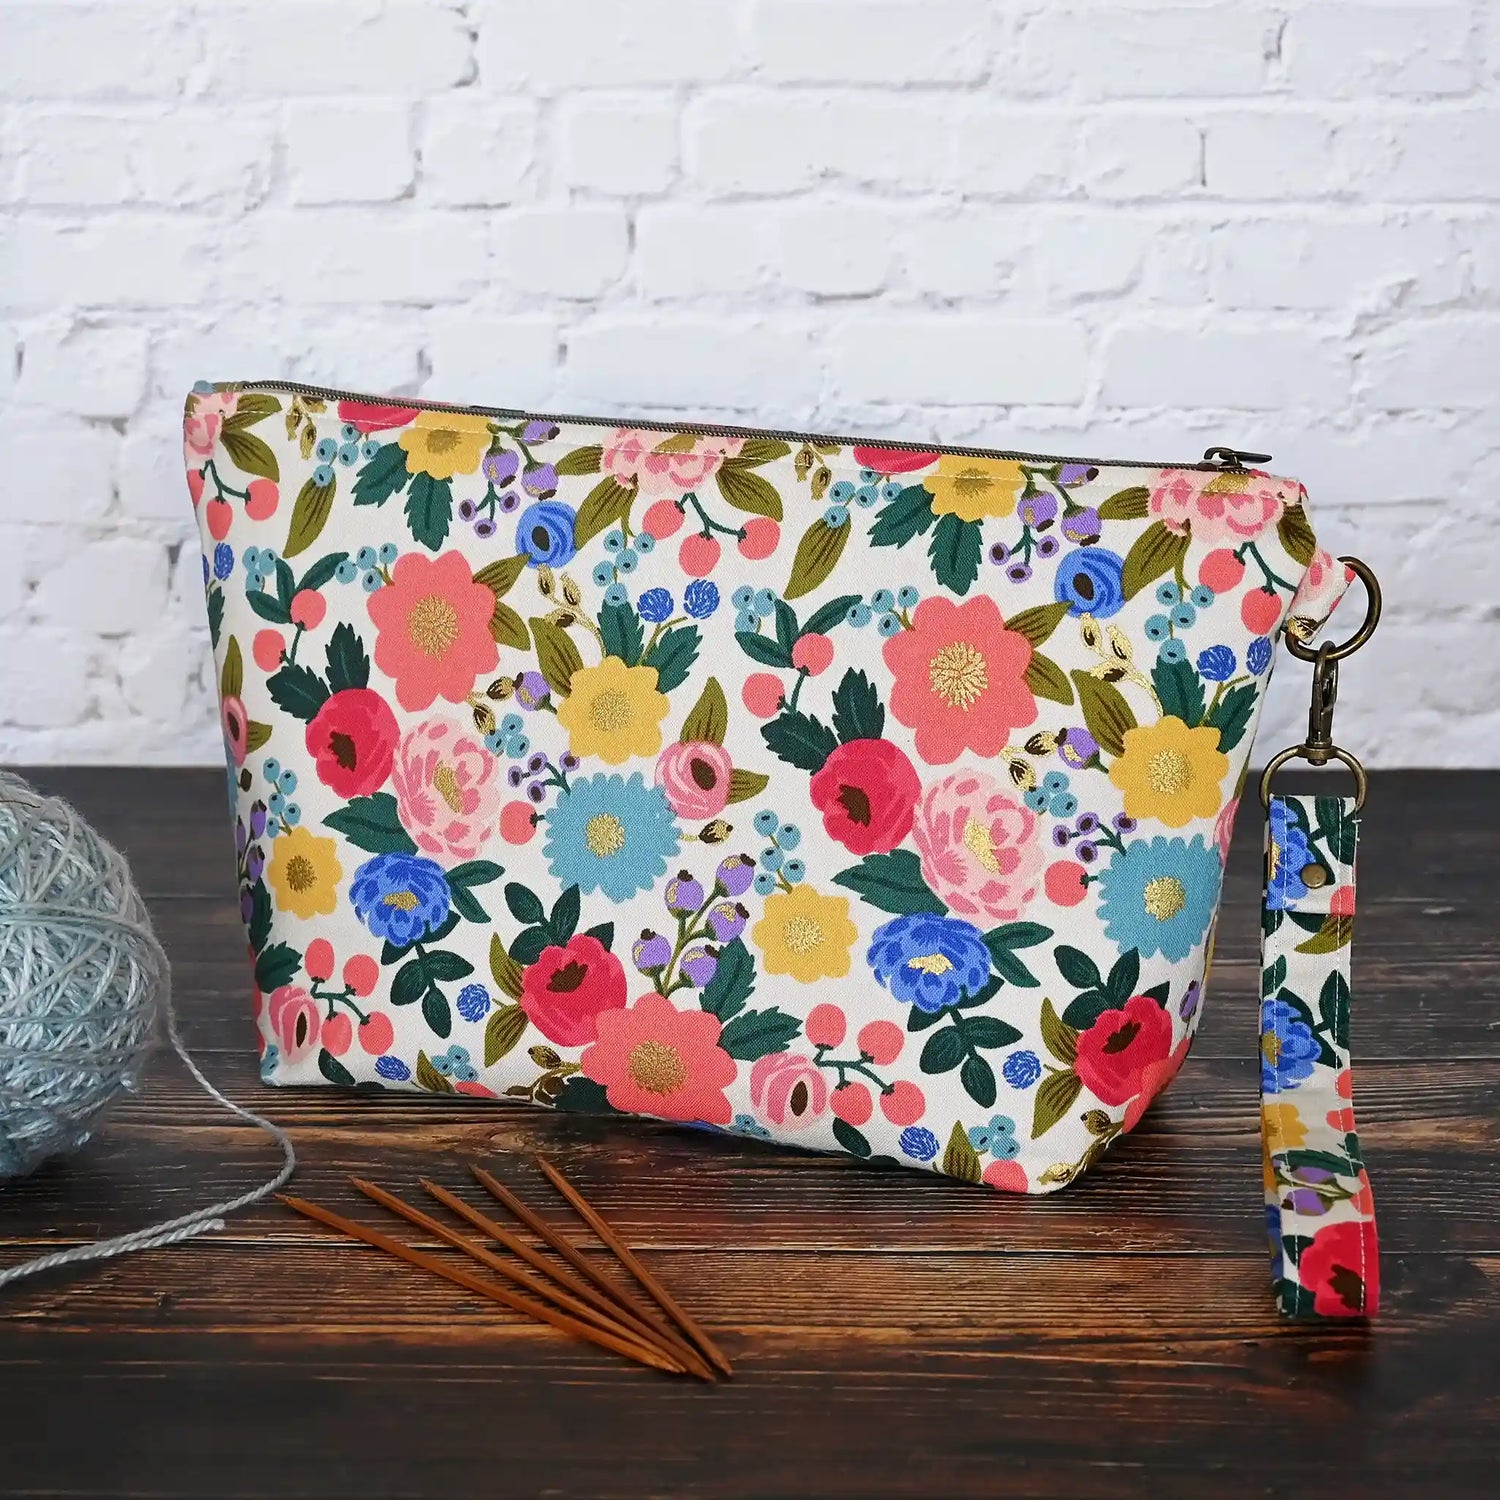 Pretty cream floral zippered pouch with wrist strap in fabrics from Rifle Paper Co's Antique Garden collection.  Handmade by Yellow Petal Handmade in Canada.